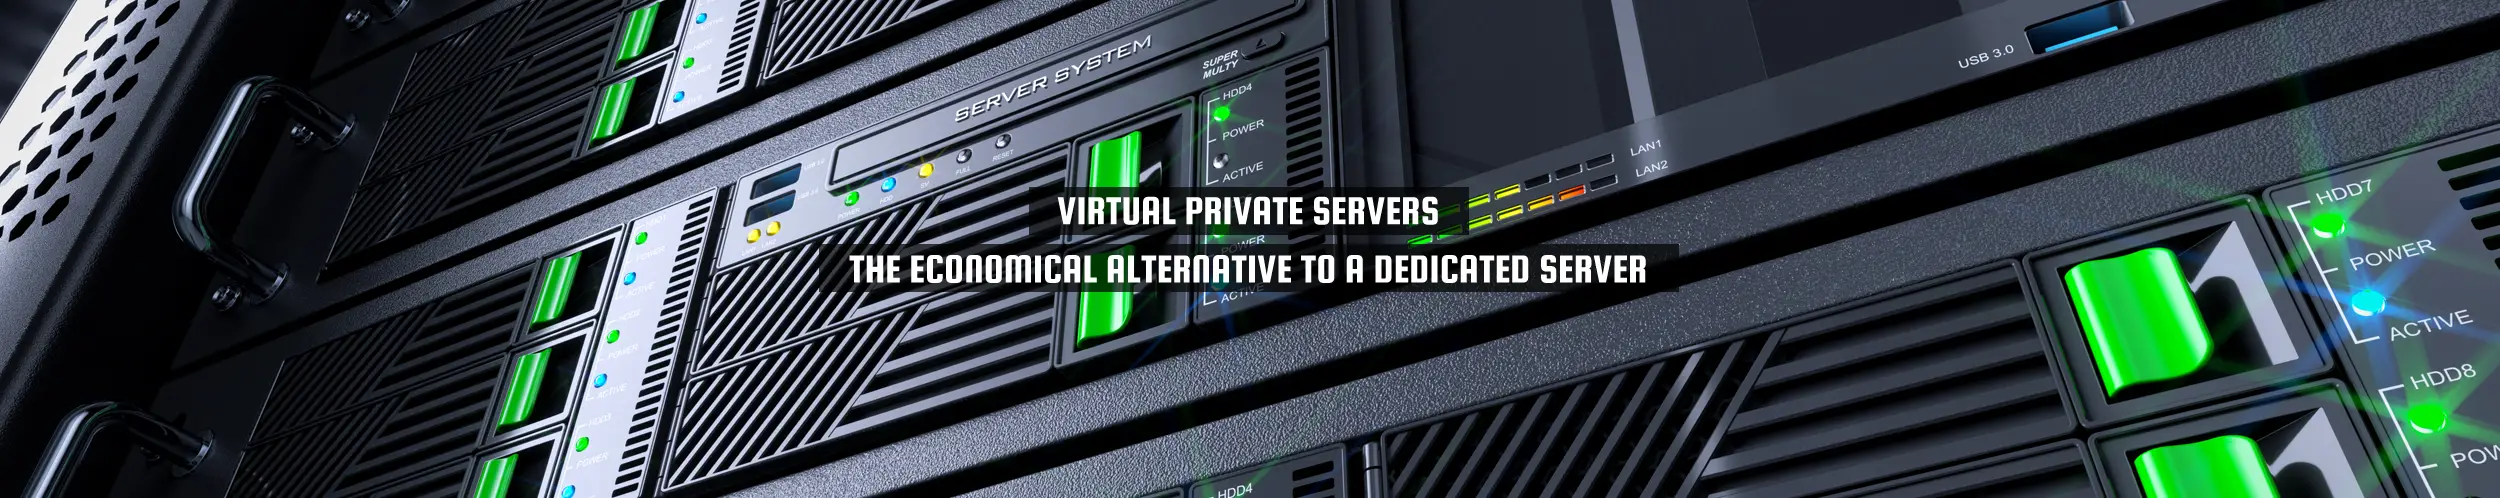 52Degrees Virtual Hosting - feature image | "virtual private servers - the economical alternative to a dedicated server" | close up of a virtual private server with green glowing lights | Telecoms Solutions, Norwich